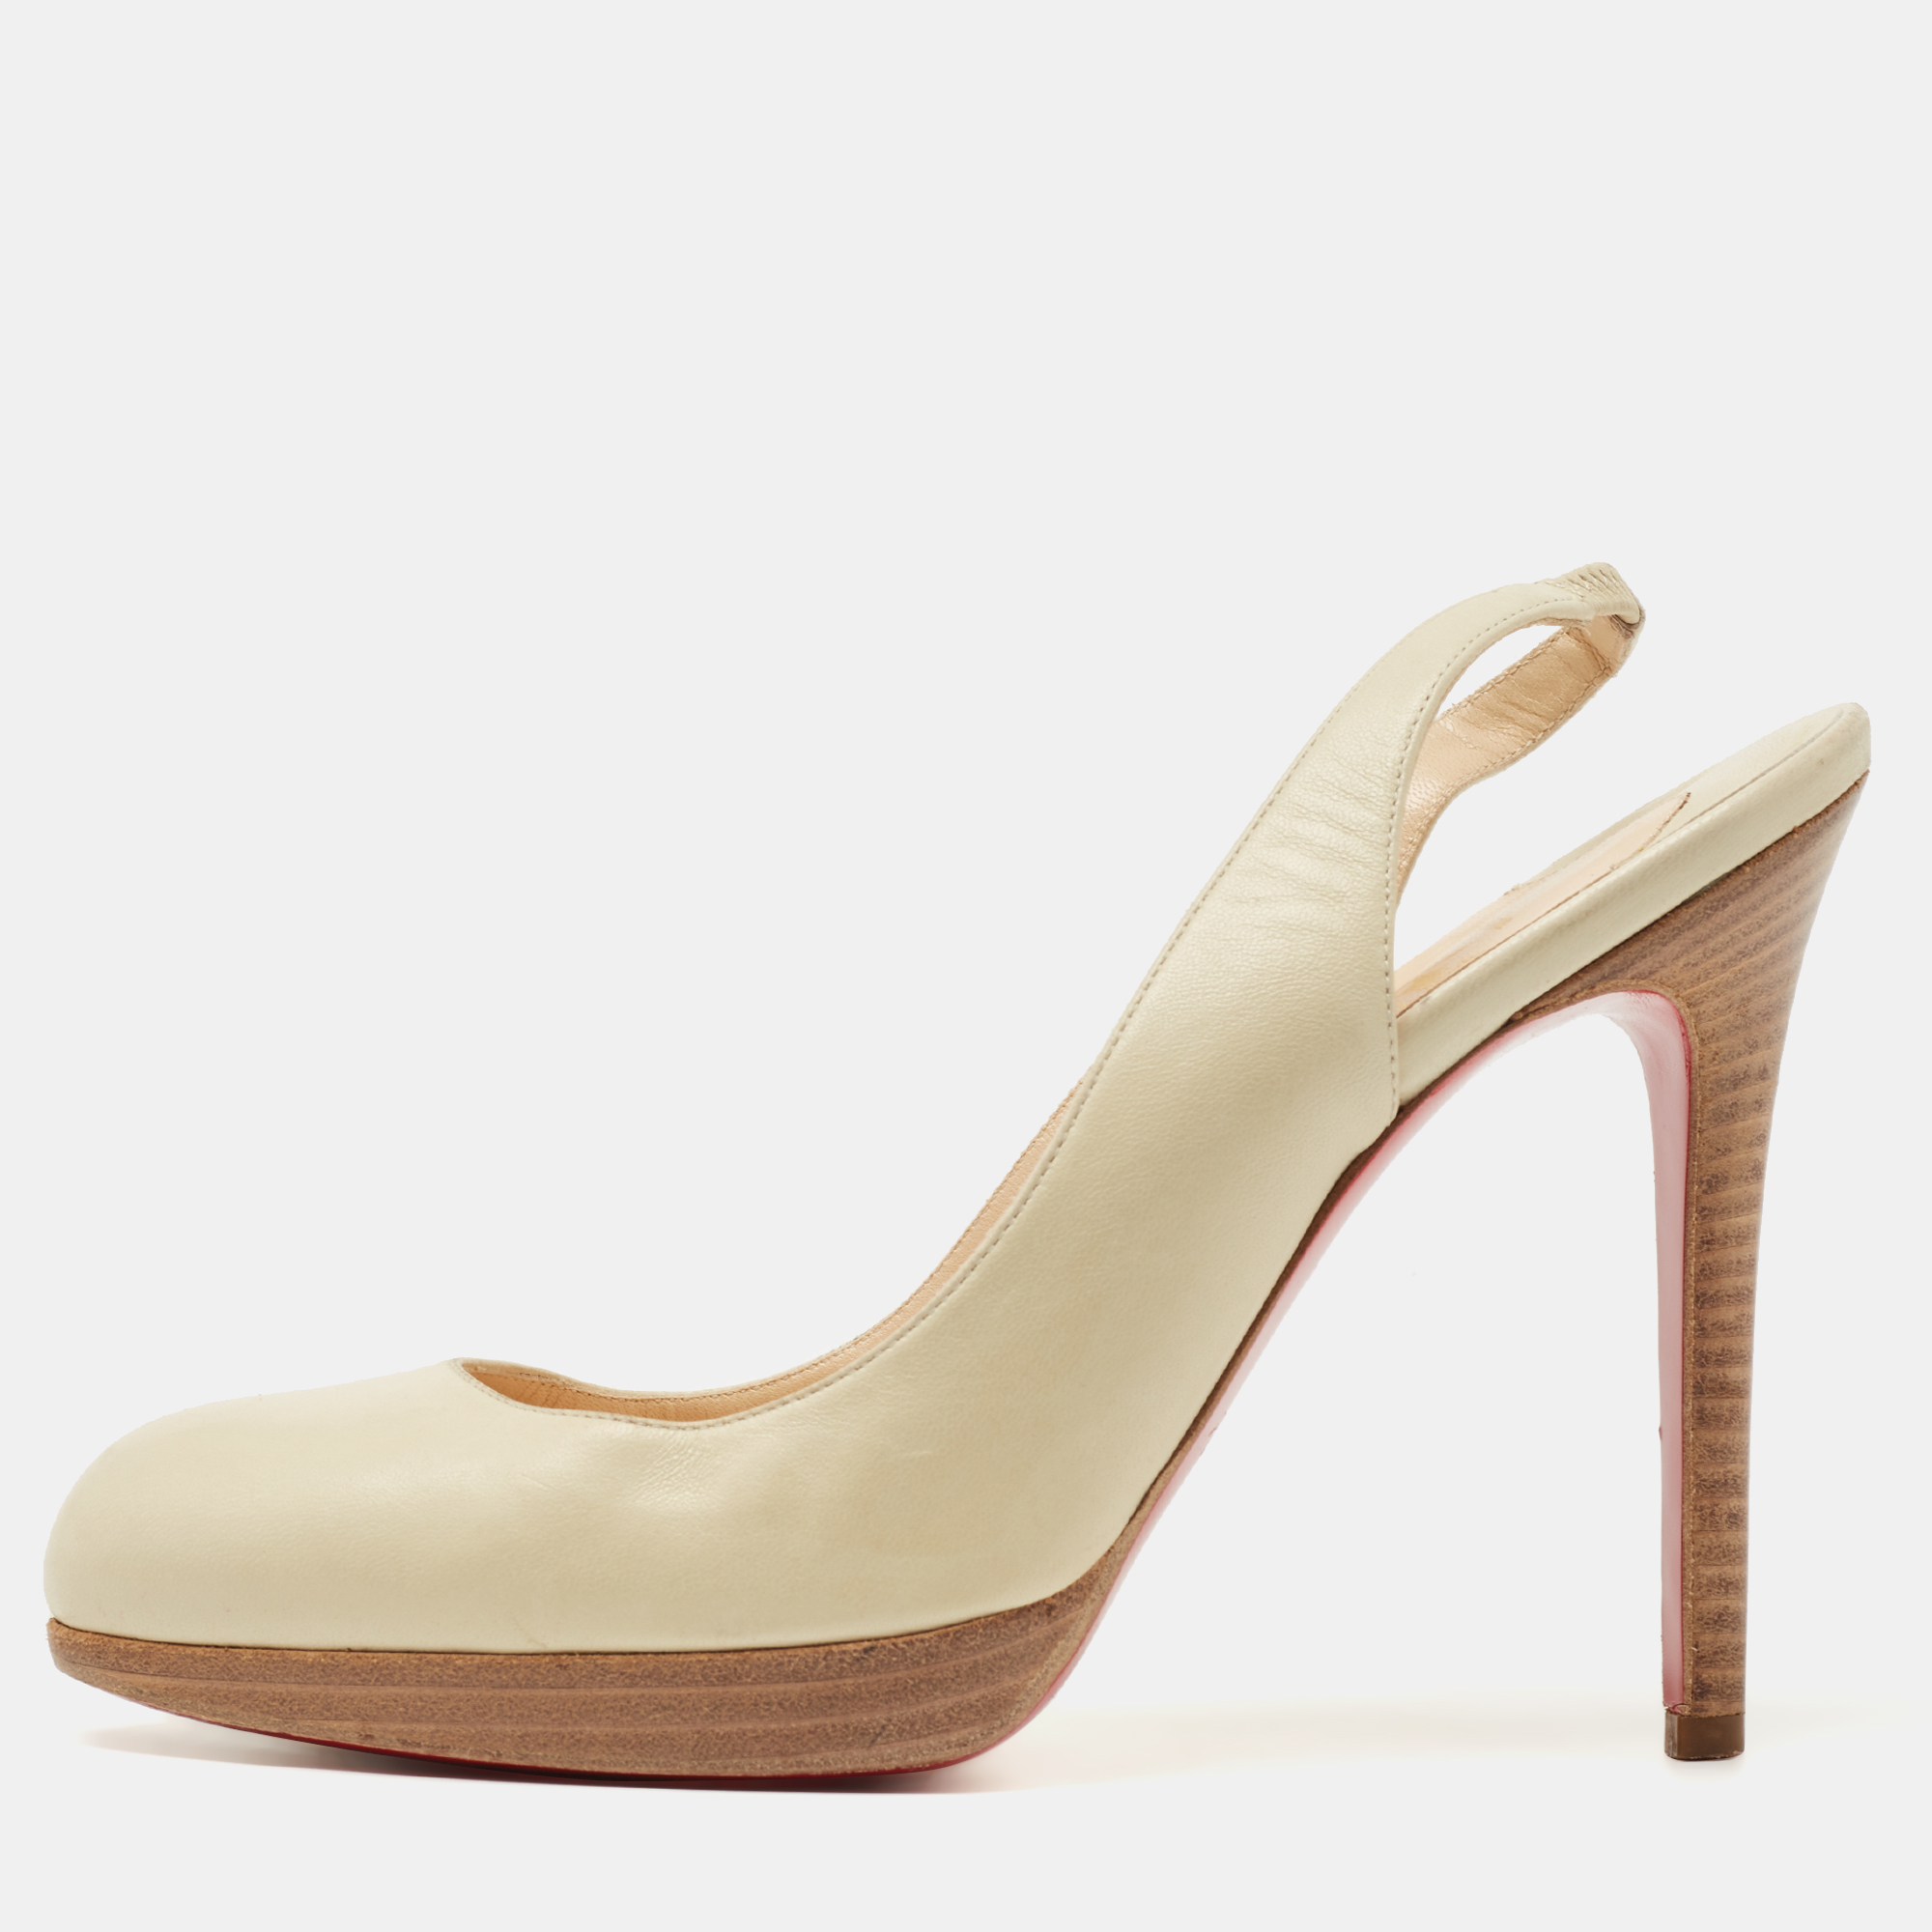 Pre-owned Christian Louboutin Cream Leather Platform Slingback Pumps Size 38.5